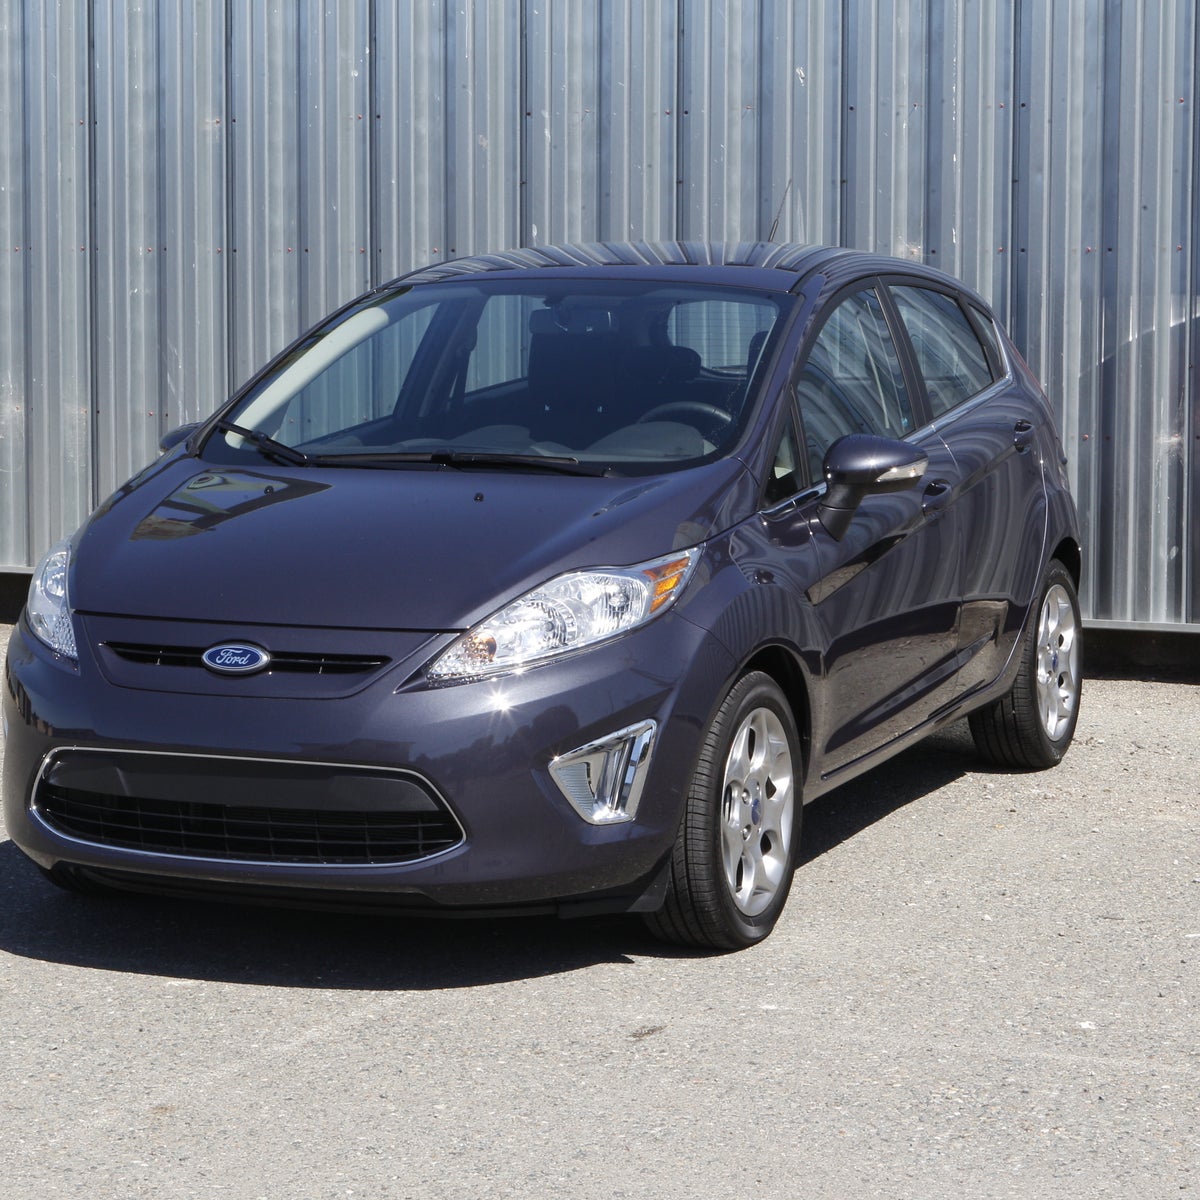 2012 Ford Fiesta review: 2012 Ford Fiesta - CNET